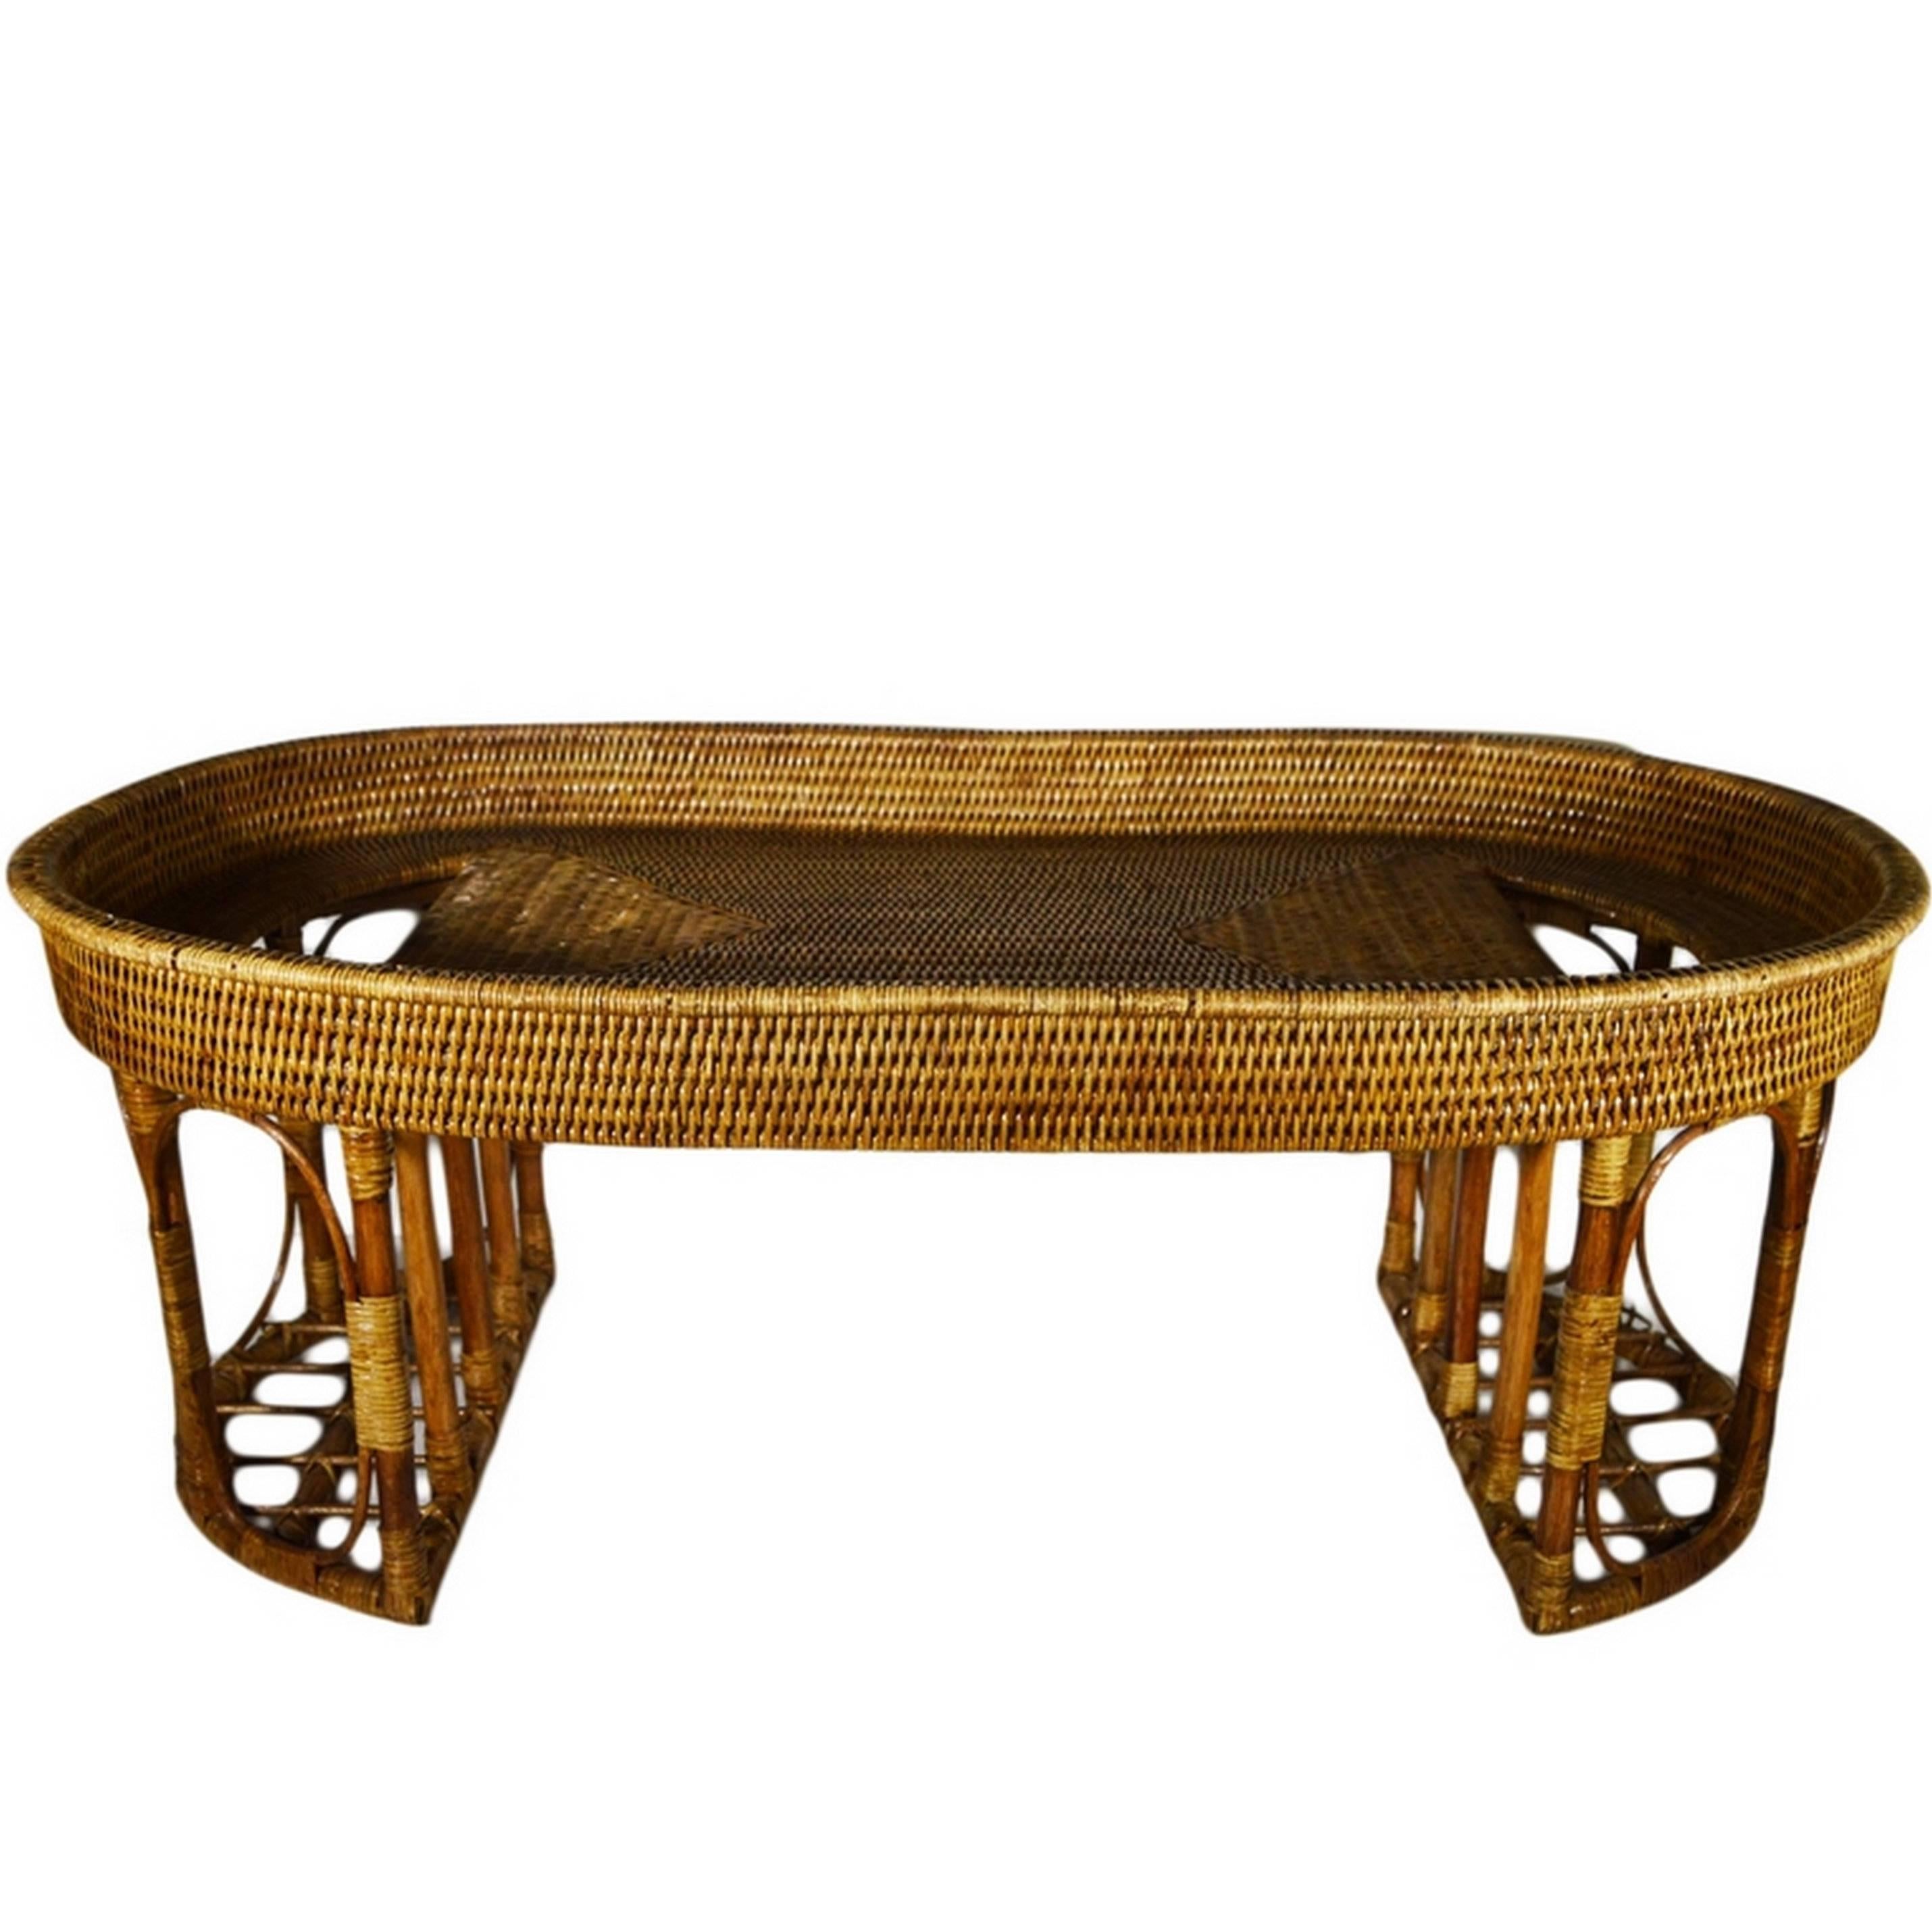 Vintage Burmese Handwoven Rattan Breakfast Coffee Serving Table from the 1970s